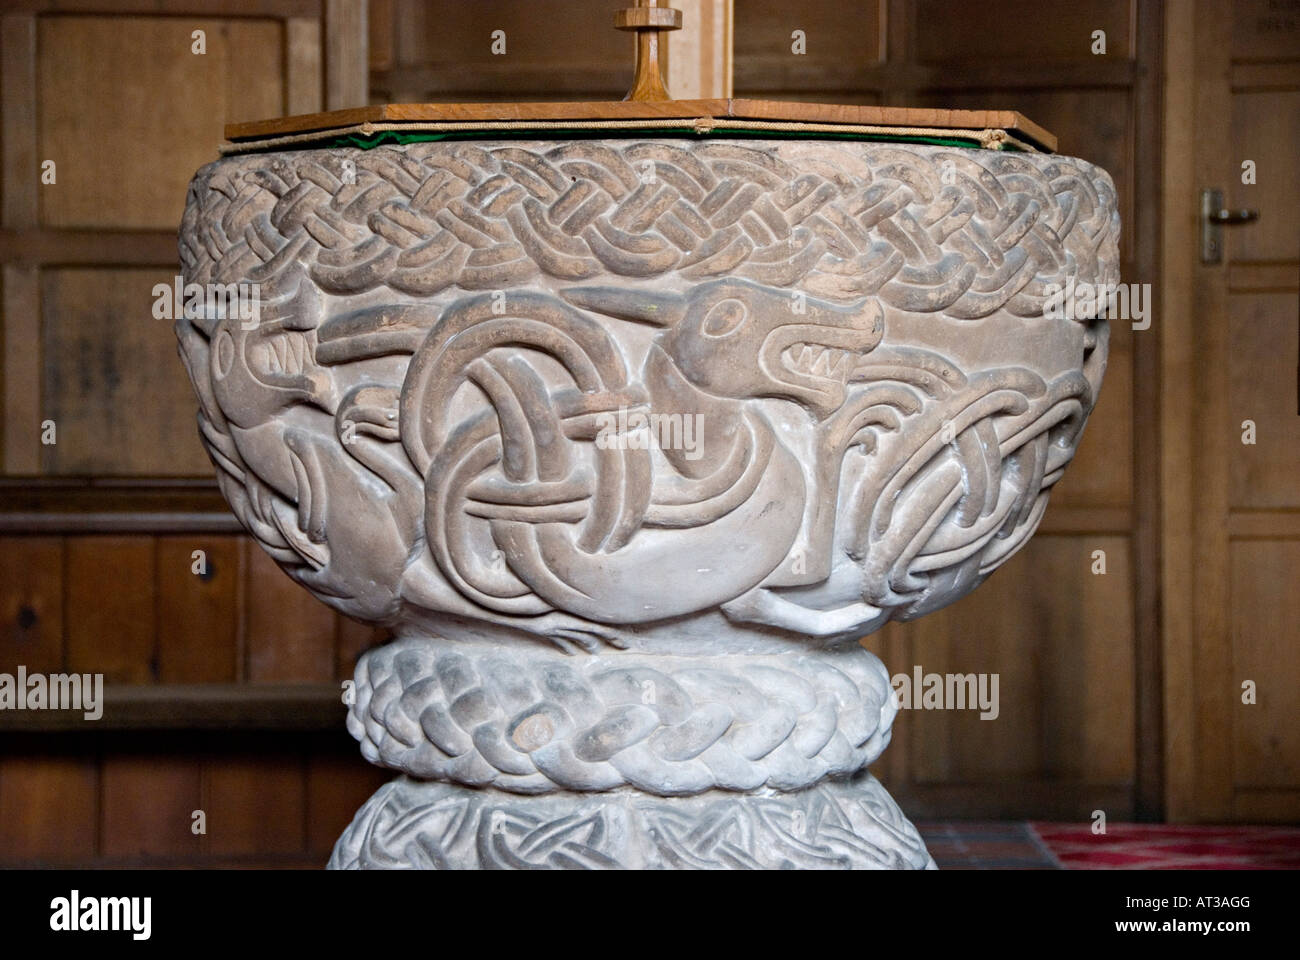 St Cassian's Church, Chaddesley Corbett, Worcestershire, UK. The ornate Romanesque 12c stone font, carved with a pattern of interlaced dragons Stock Photo